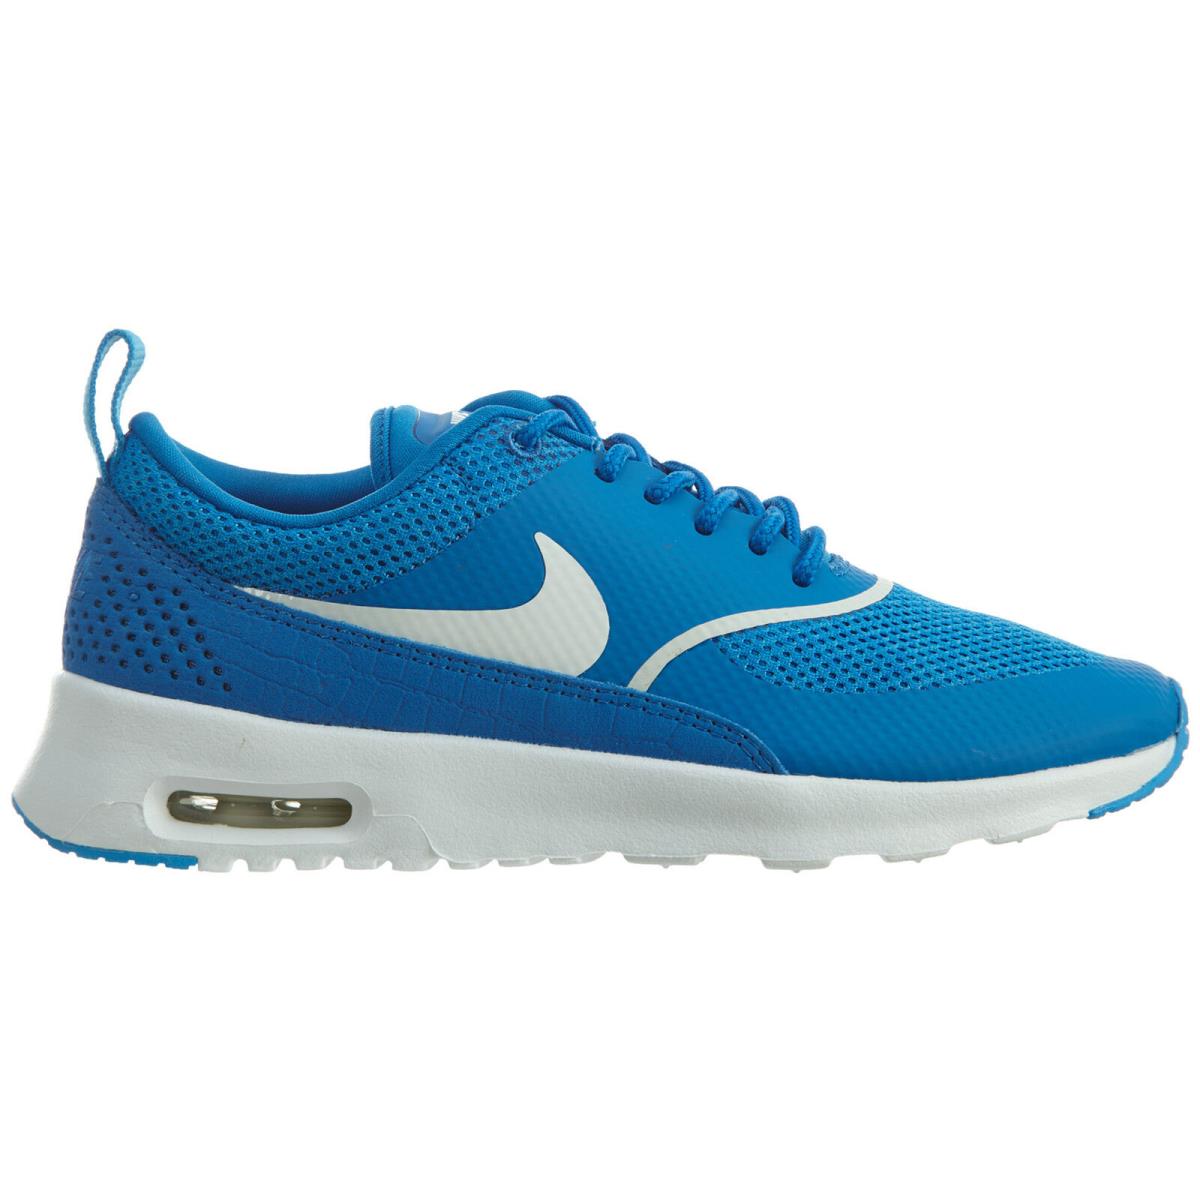 Nike Air Max Thea Womens 599409-413 Blue Spark Glow White Running Shoes Size 6.5